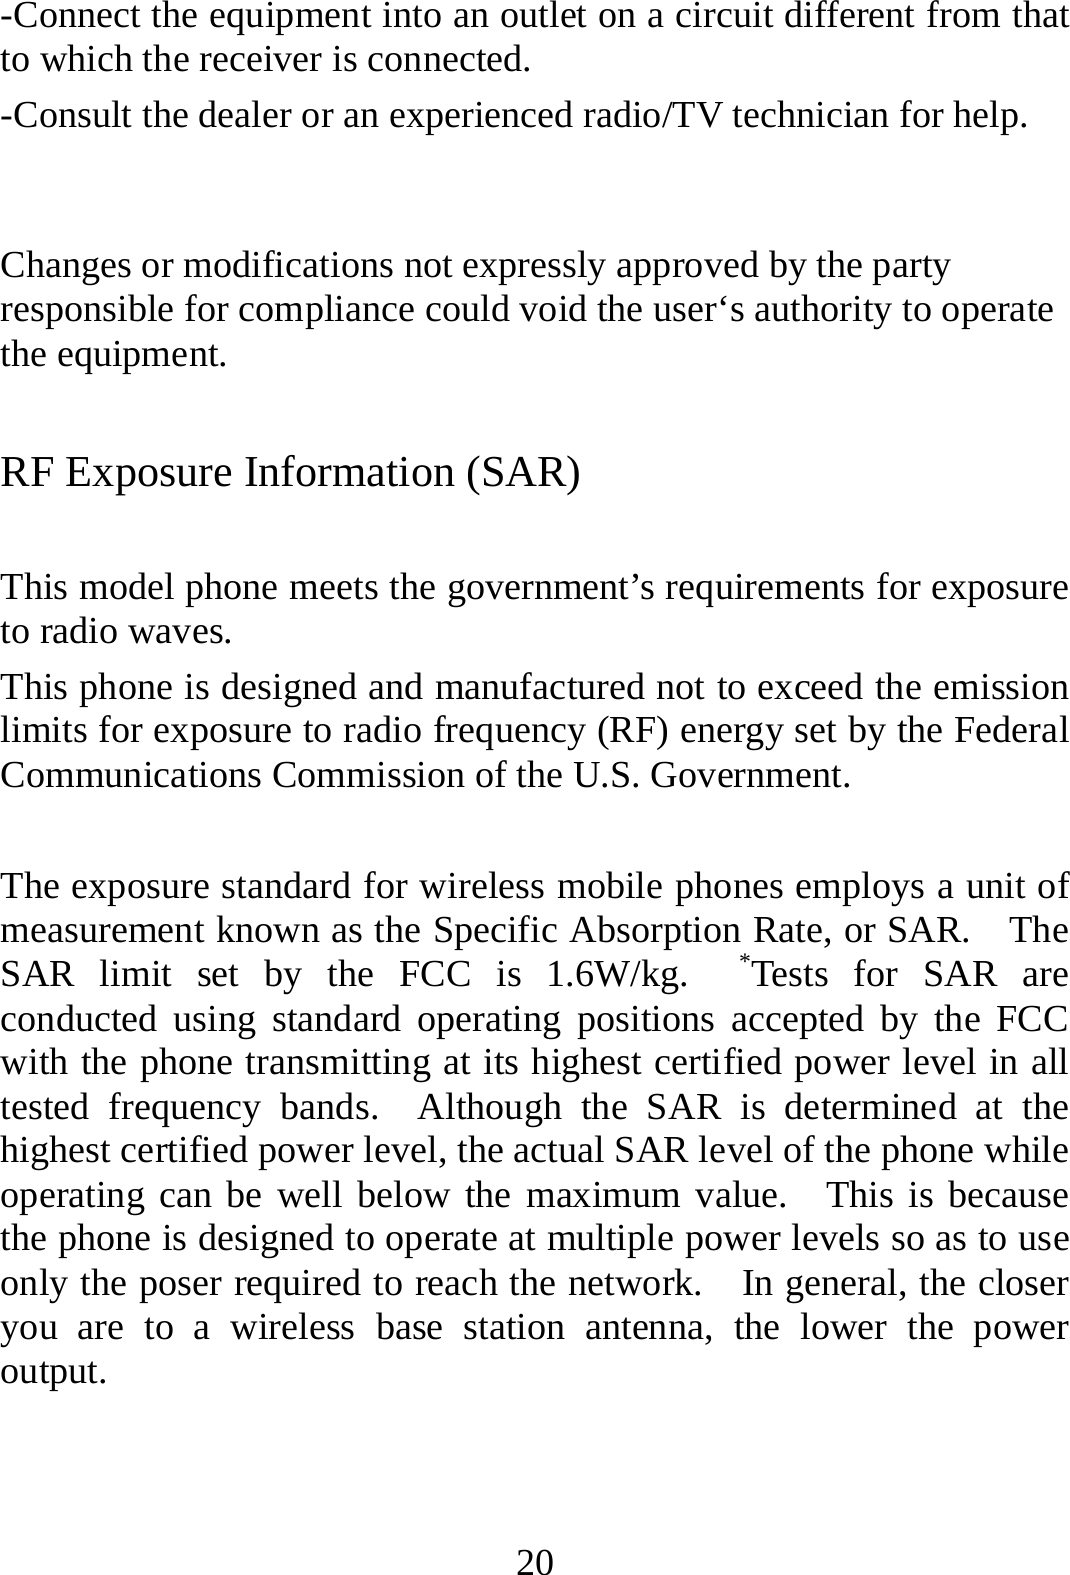 20 -Connect the equipment into an outlet on a circuit different from that to which the receiver is connected. -Consult the dealer or an experienced radio/TV technician for help.  Changes or modifications not expressly approved by the party responsible for compliance could void the user‘s authority to operate the equipment. RF Exposure Information (SAR)  This model phone meets the government’s requirements for exposure to radio waves. This phone is designed and manufactured not to exceed the emission limits for exposure to radio frequency (RF) energy set by the Federal Communications Commission of the U.S. Government.      The exposure standard for wireless mobile phones employs a unit of measurement known as the Specific Absorption Rate, or SAR.    The SAR limit set by the FCC is 1.6W/kg.  *Tests for SAR are conducted using standard operating positions accepted by the FCC with the phone transmitting at its highest certified power level in all tested frequency bands.  Although the SAR is determined at the highest certified power level, the actual SAR level of the phone while operating can be well below the maximum value.  This is because the phone is designed to operate at multiple power levels so as to use only the poser required to reach the network.    In general, the closer you are to a wireless base station antenna, the lower the power output.  